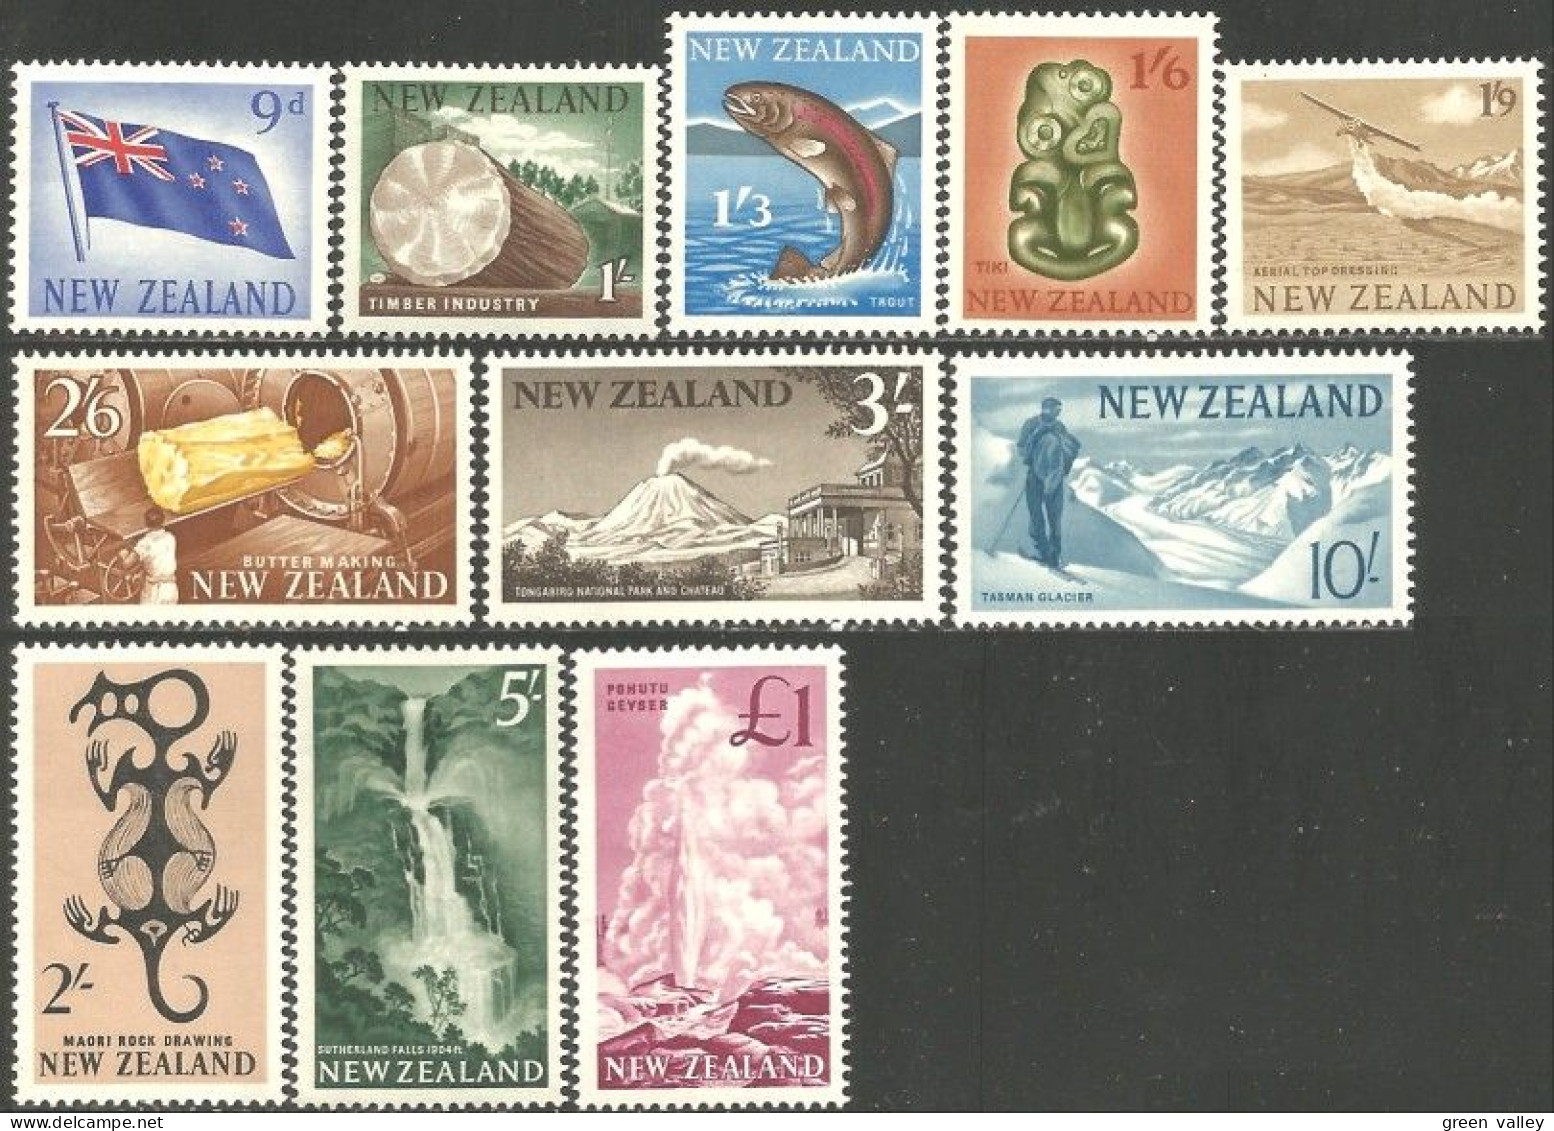 706 New Zealand 1980-88 High Values Hautes Valeurs MH * Neuf (NZ-25) - Unused Stamps